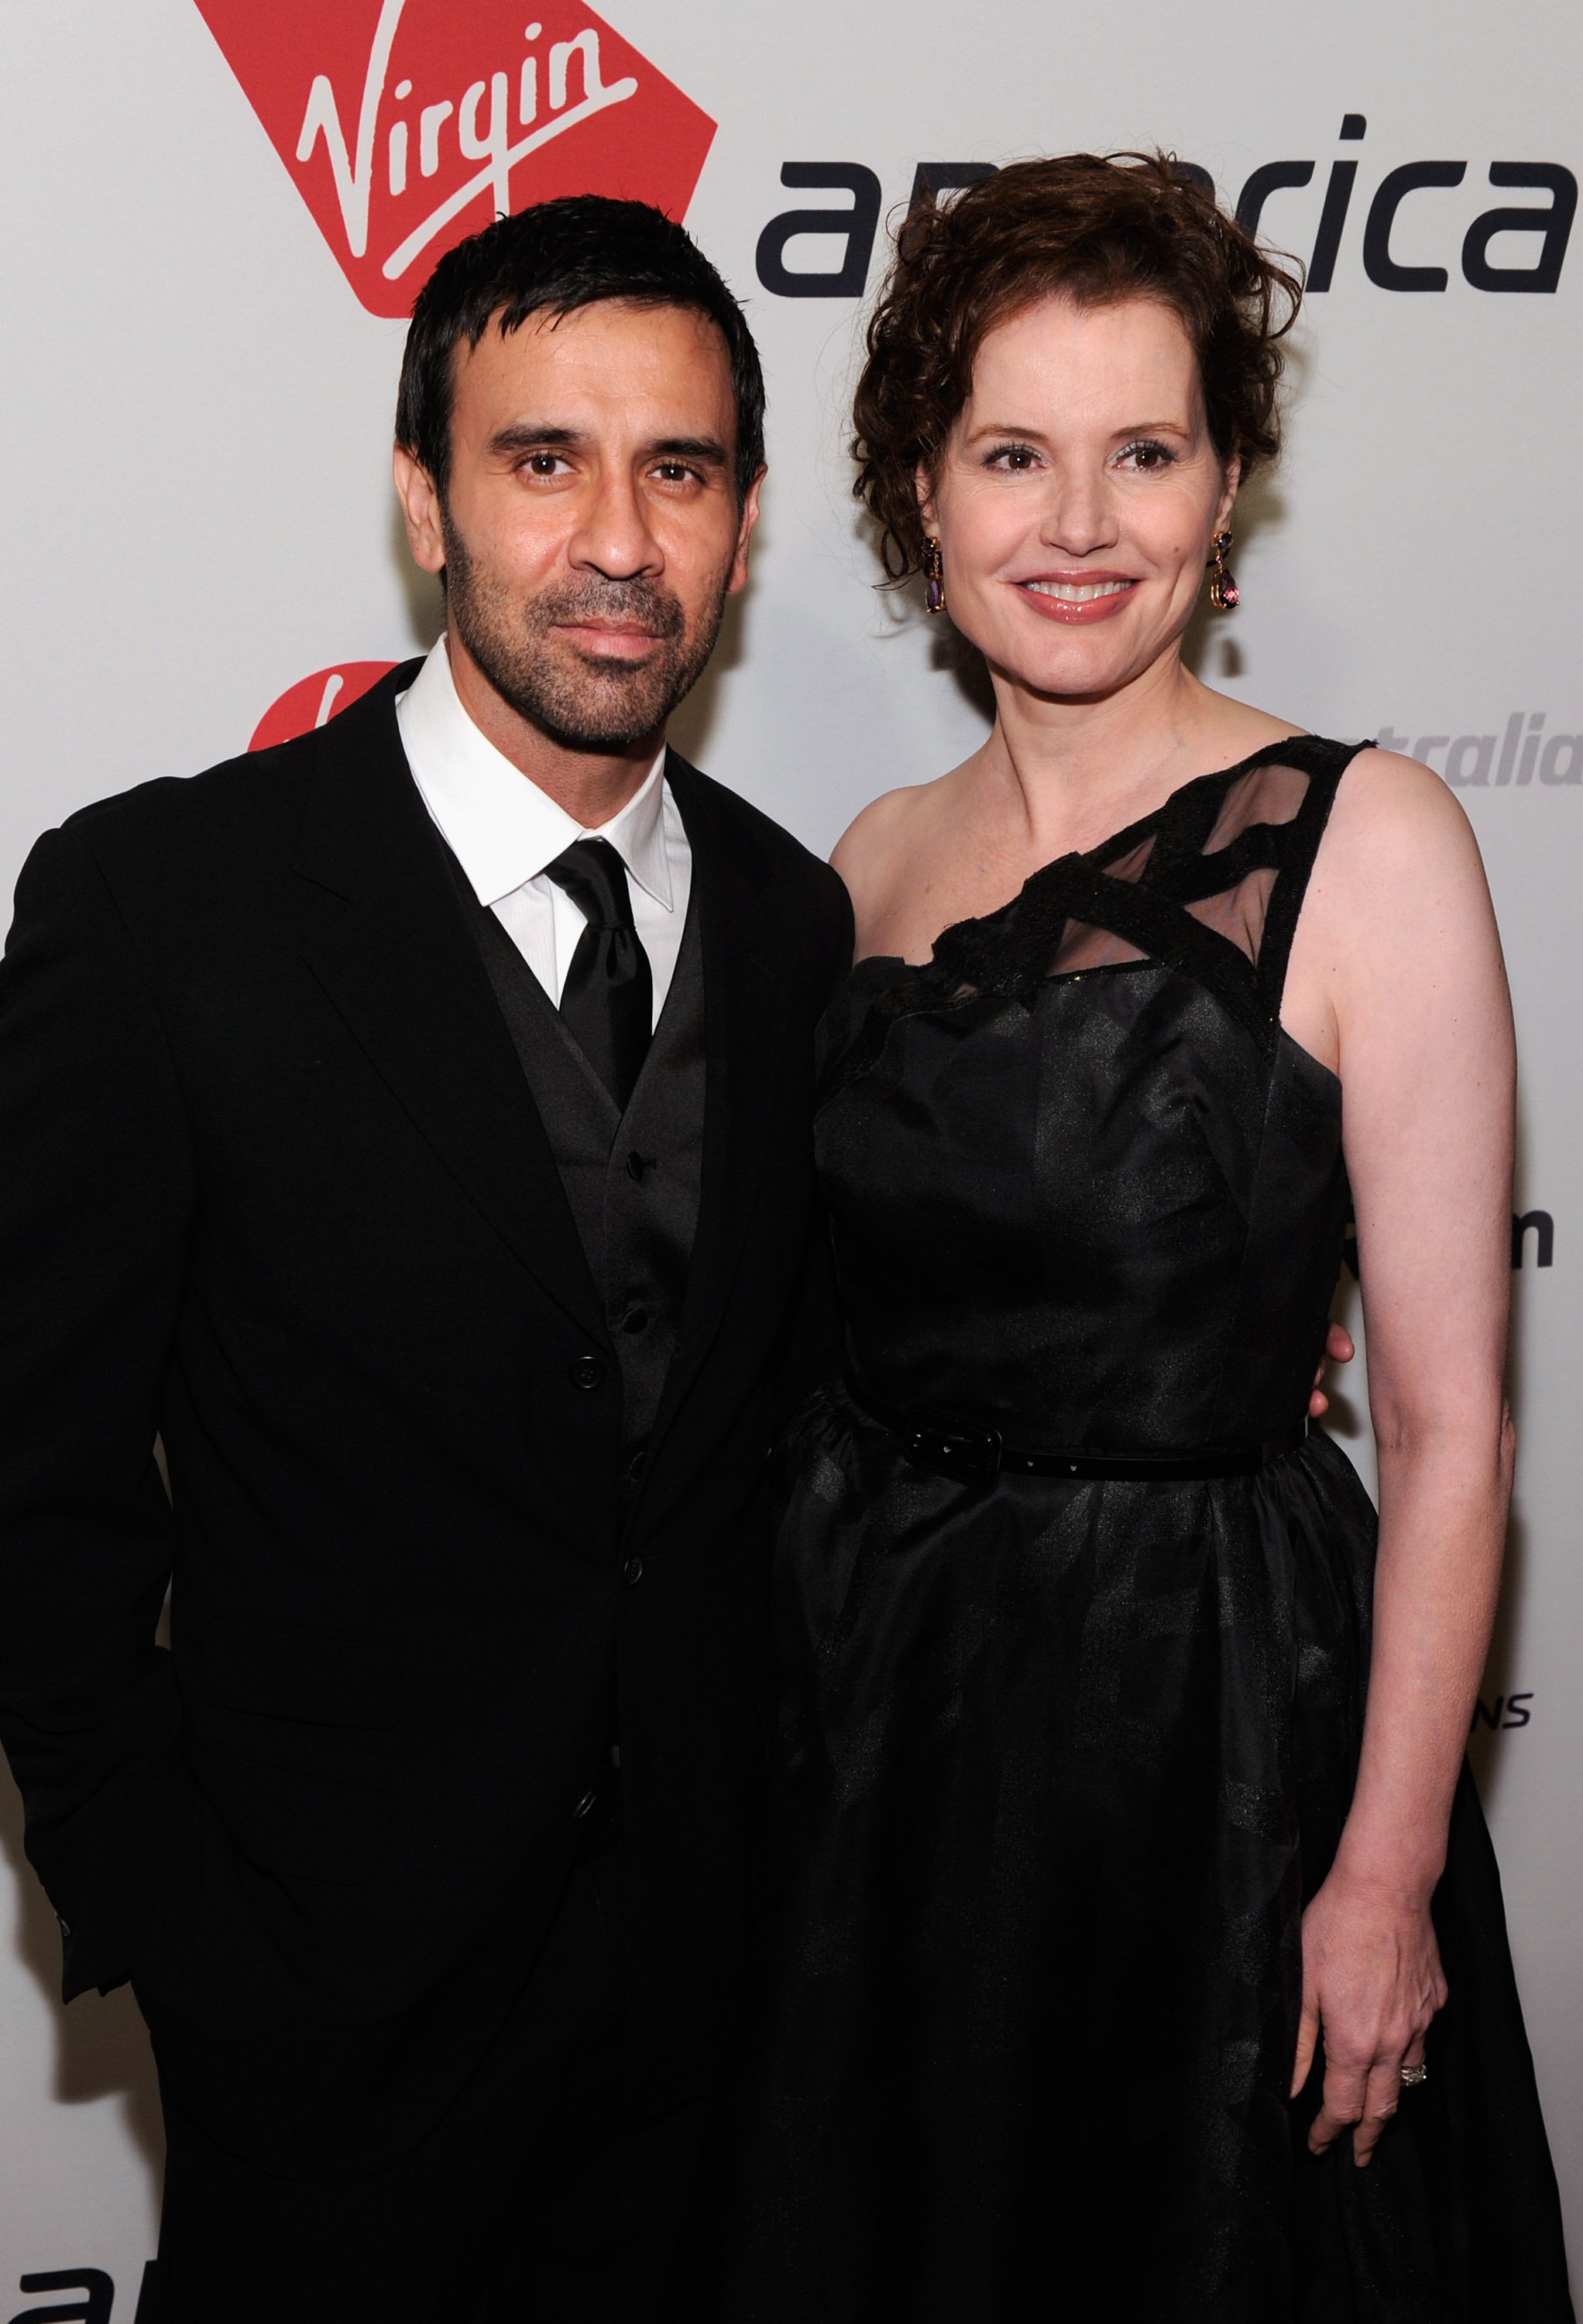 Geena Davis and Reza Jarrahy during the 5th Annual Rock The Kasbah Gala in Support of Virgin Unite and The Eve Branson Foundation at Boulevard3 on November 16, 2011 in Hollywood, California. / Source: Getty Images